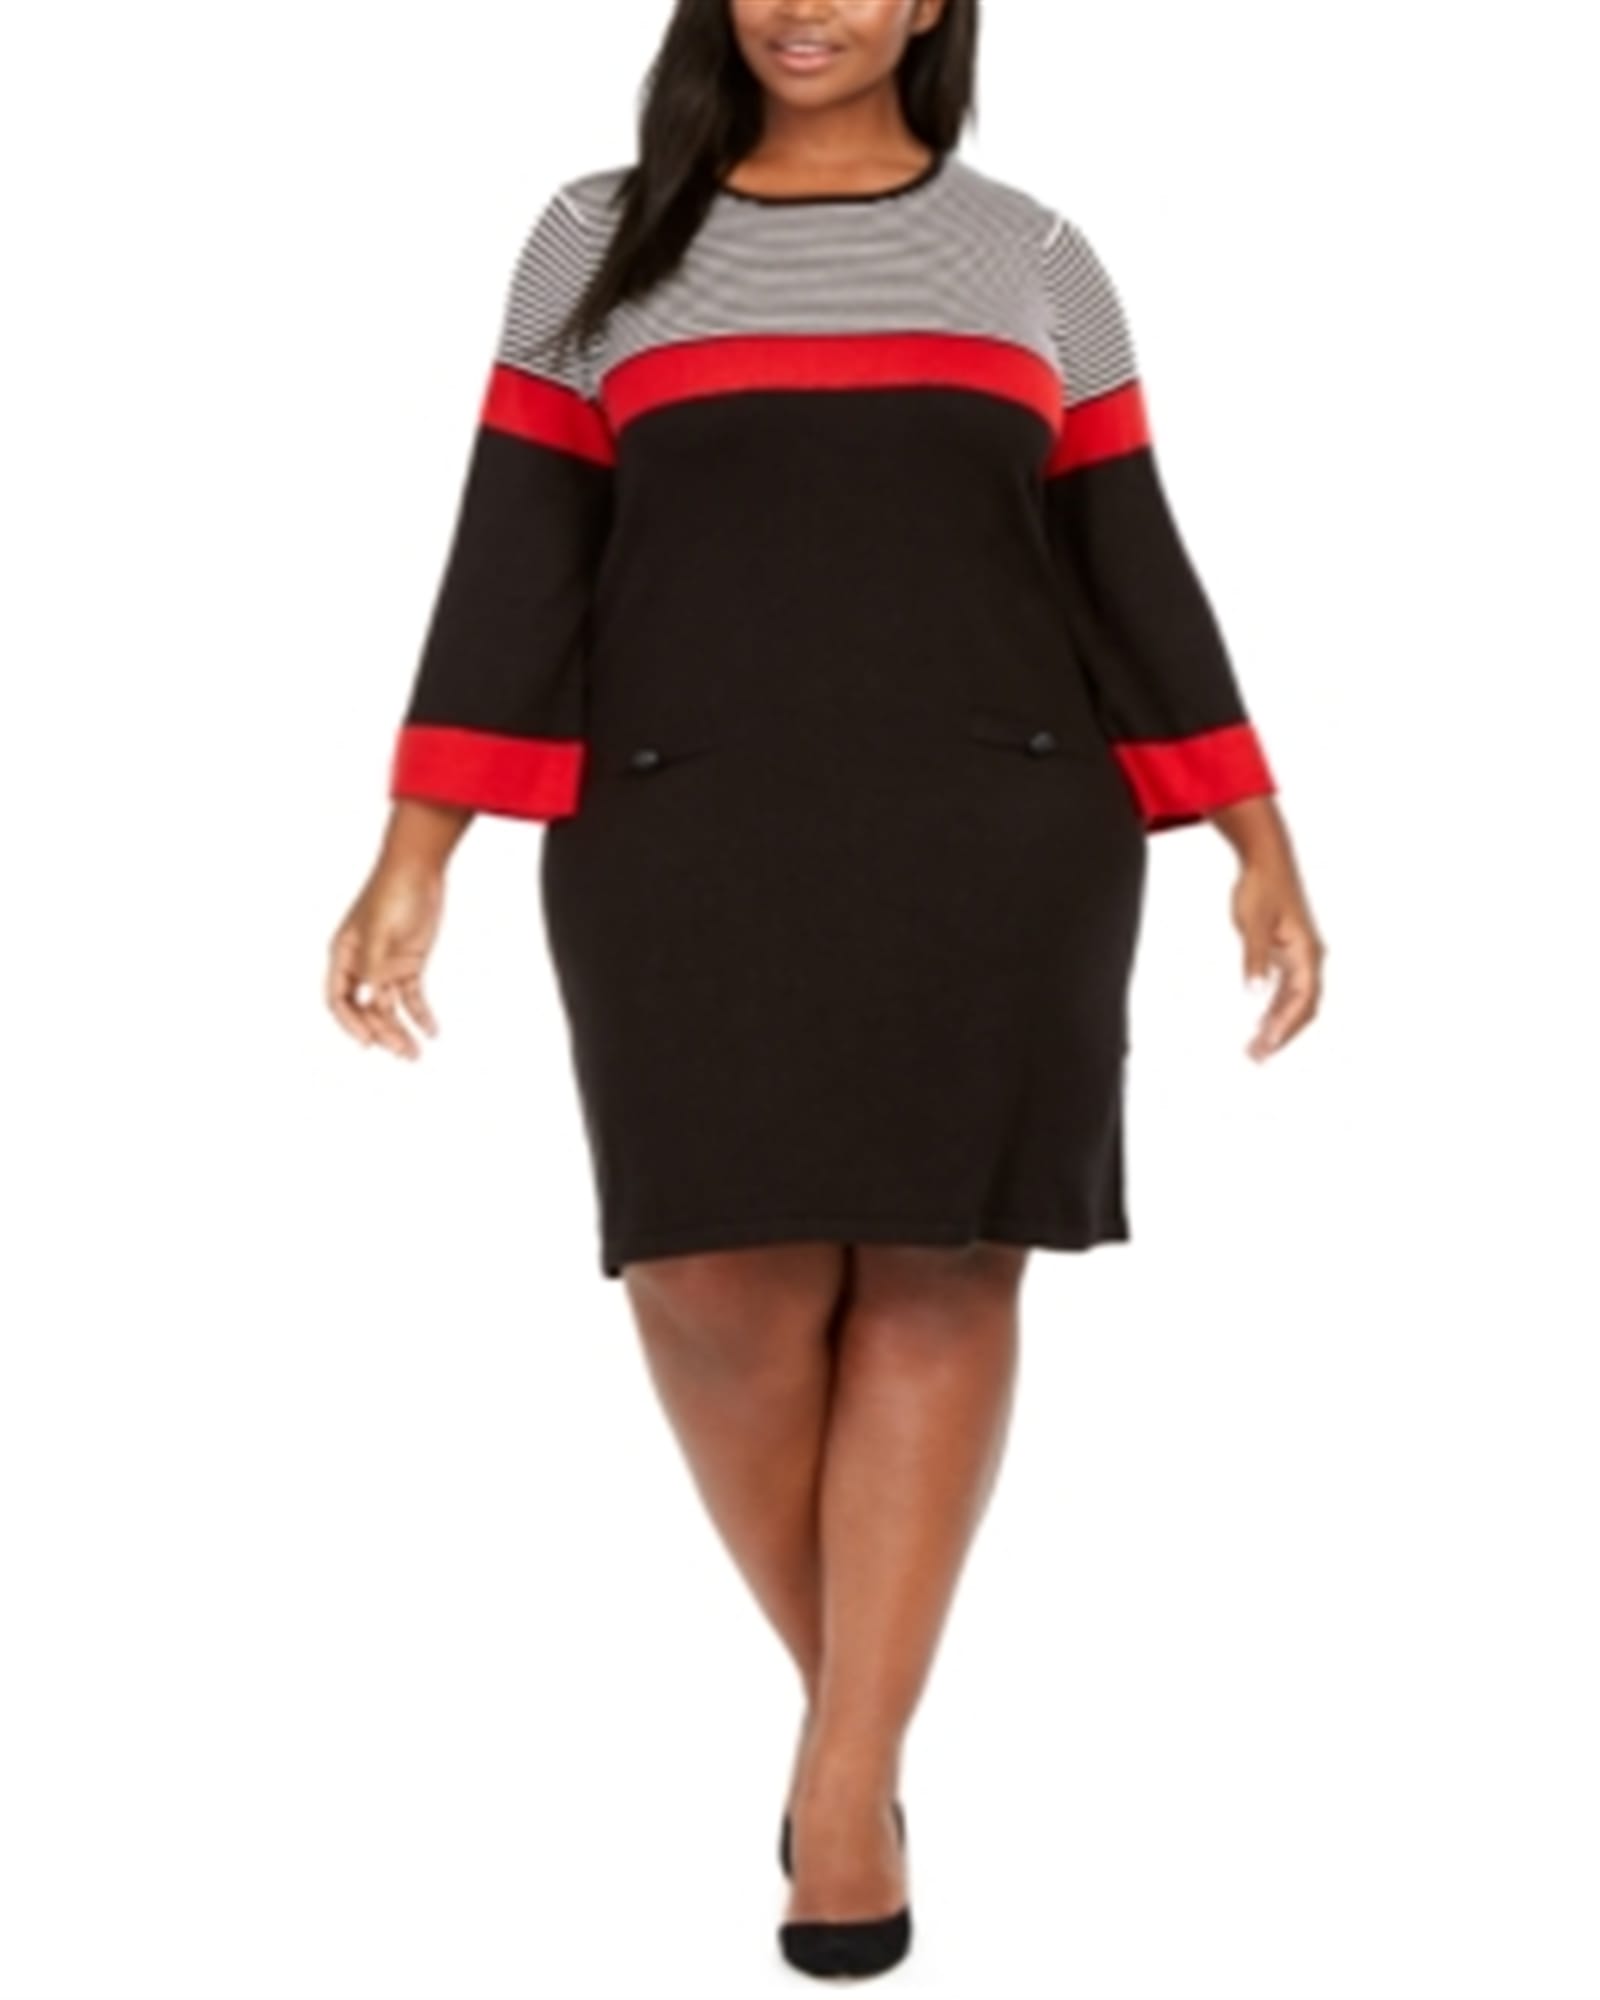 Trying The Trends  Oversized Sweater Dresses – Amanda Bella